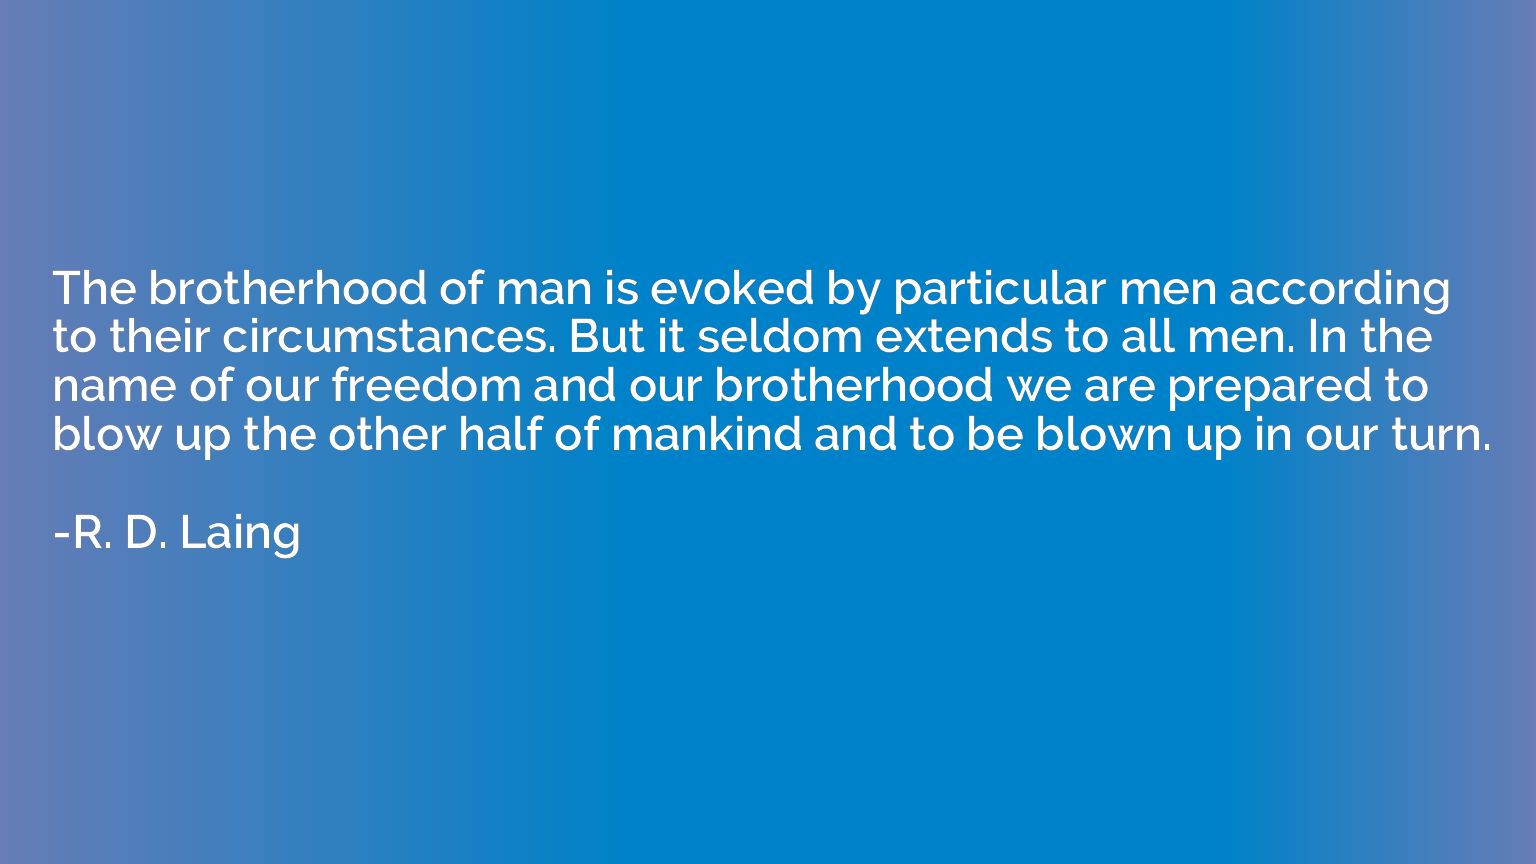 The brotherhood of man is evoked by particular men according